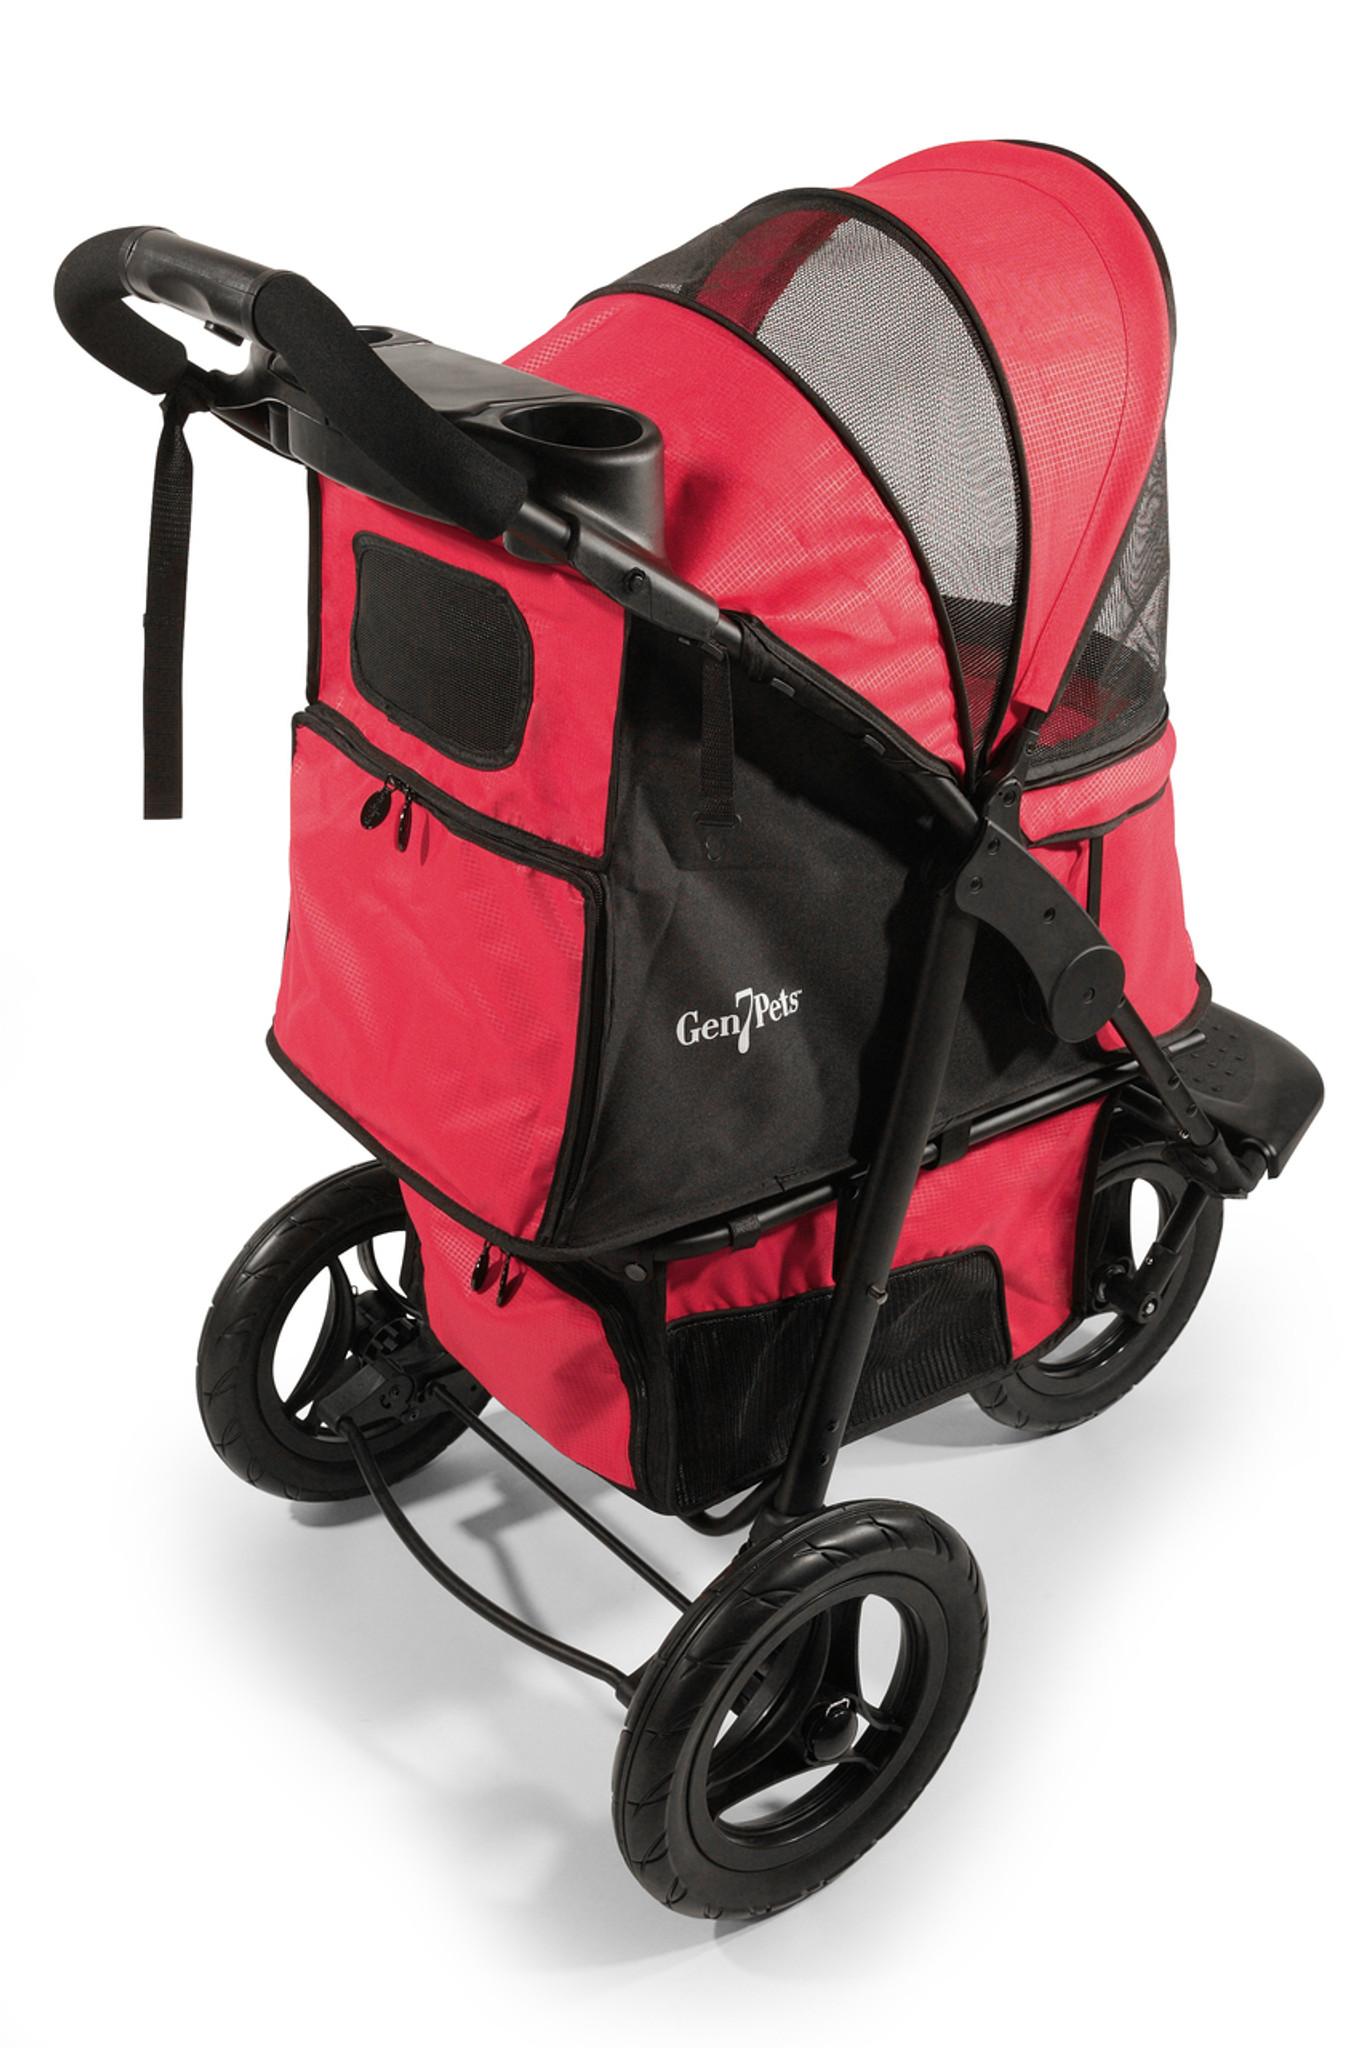 jogging stroller up to 75 lbs